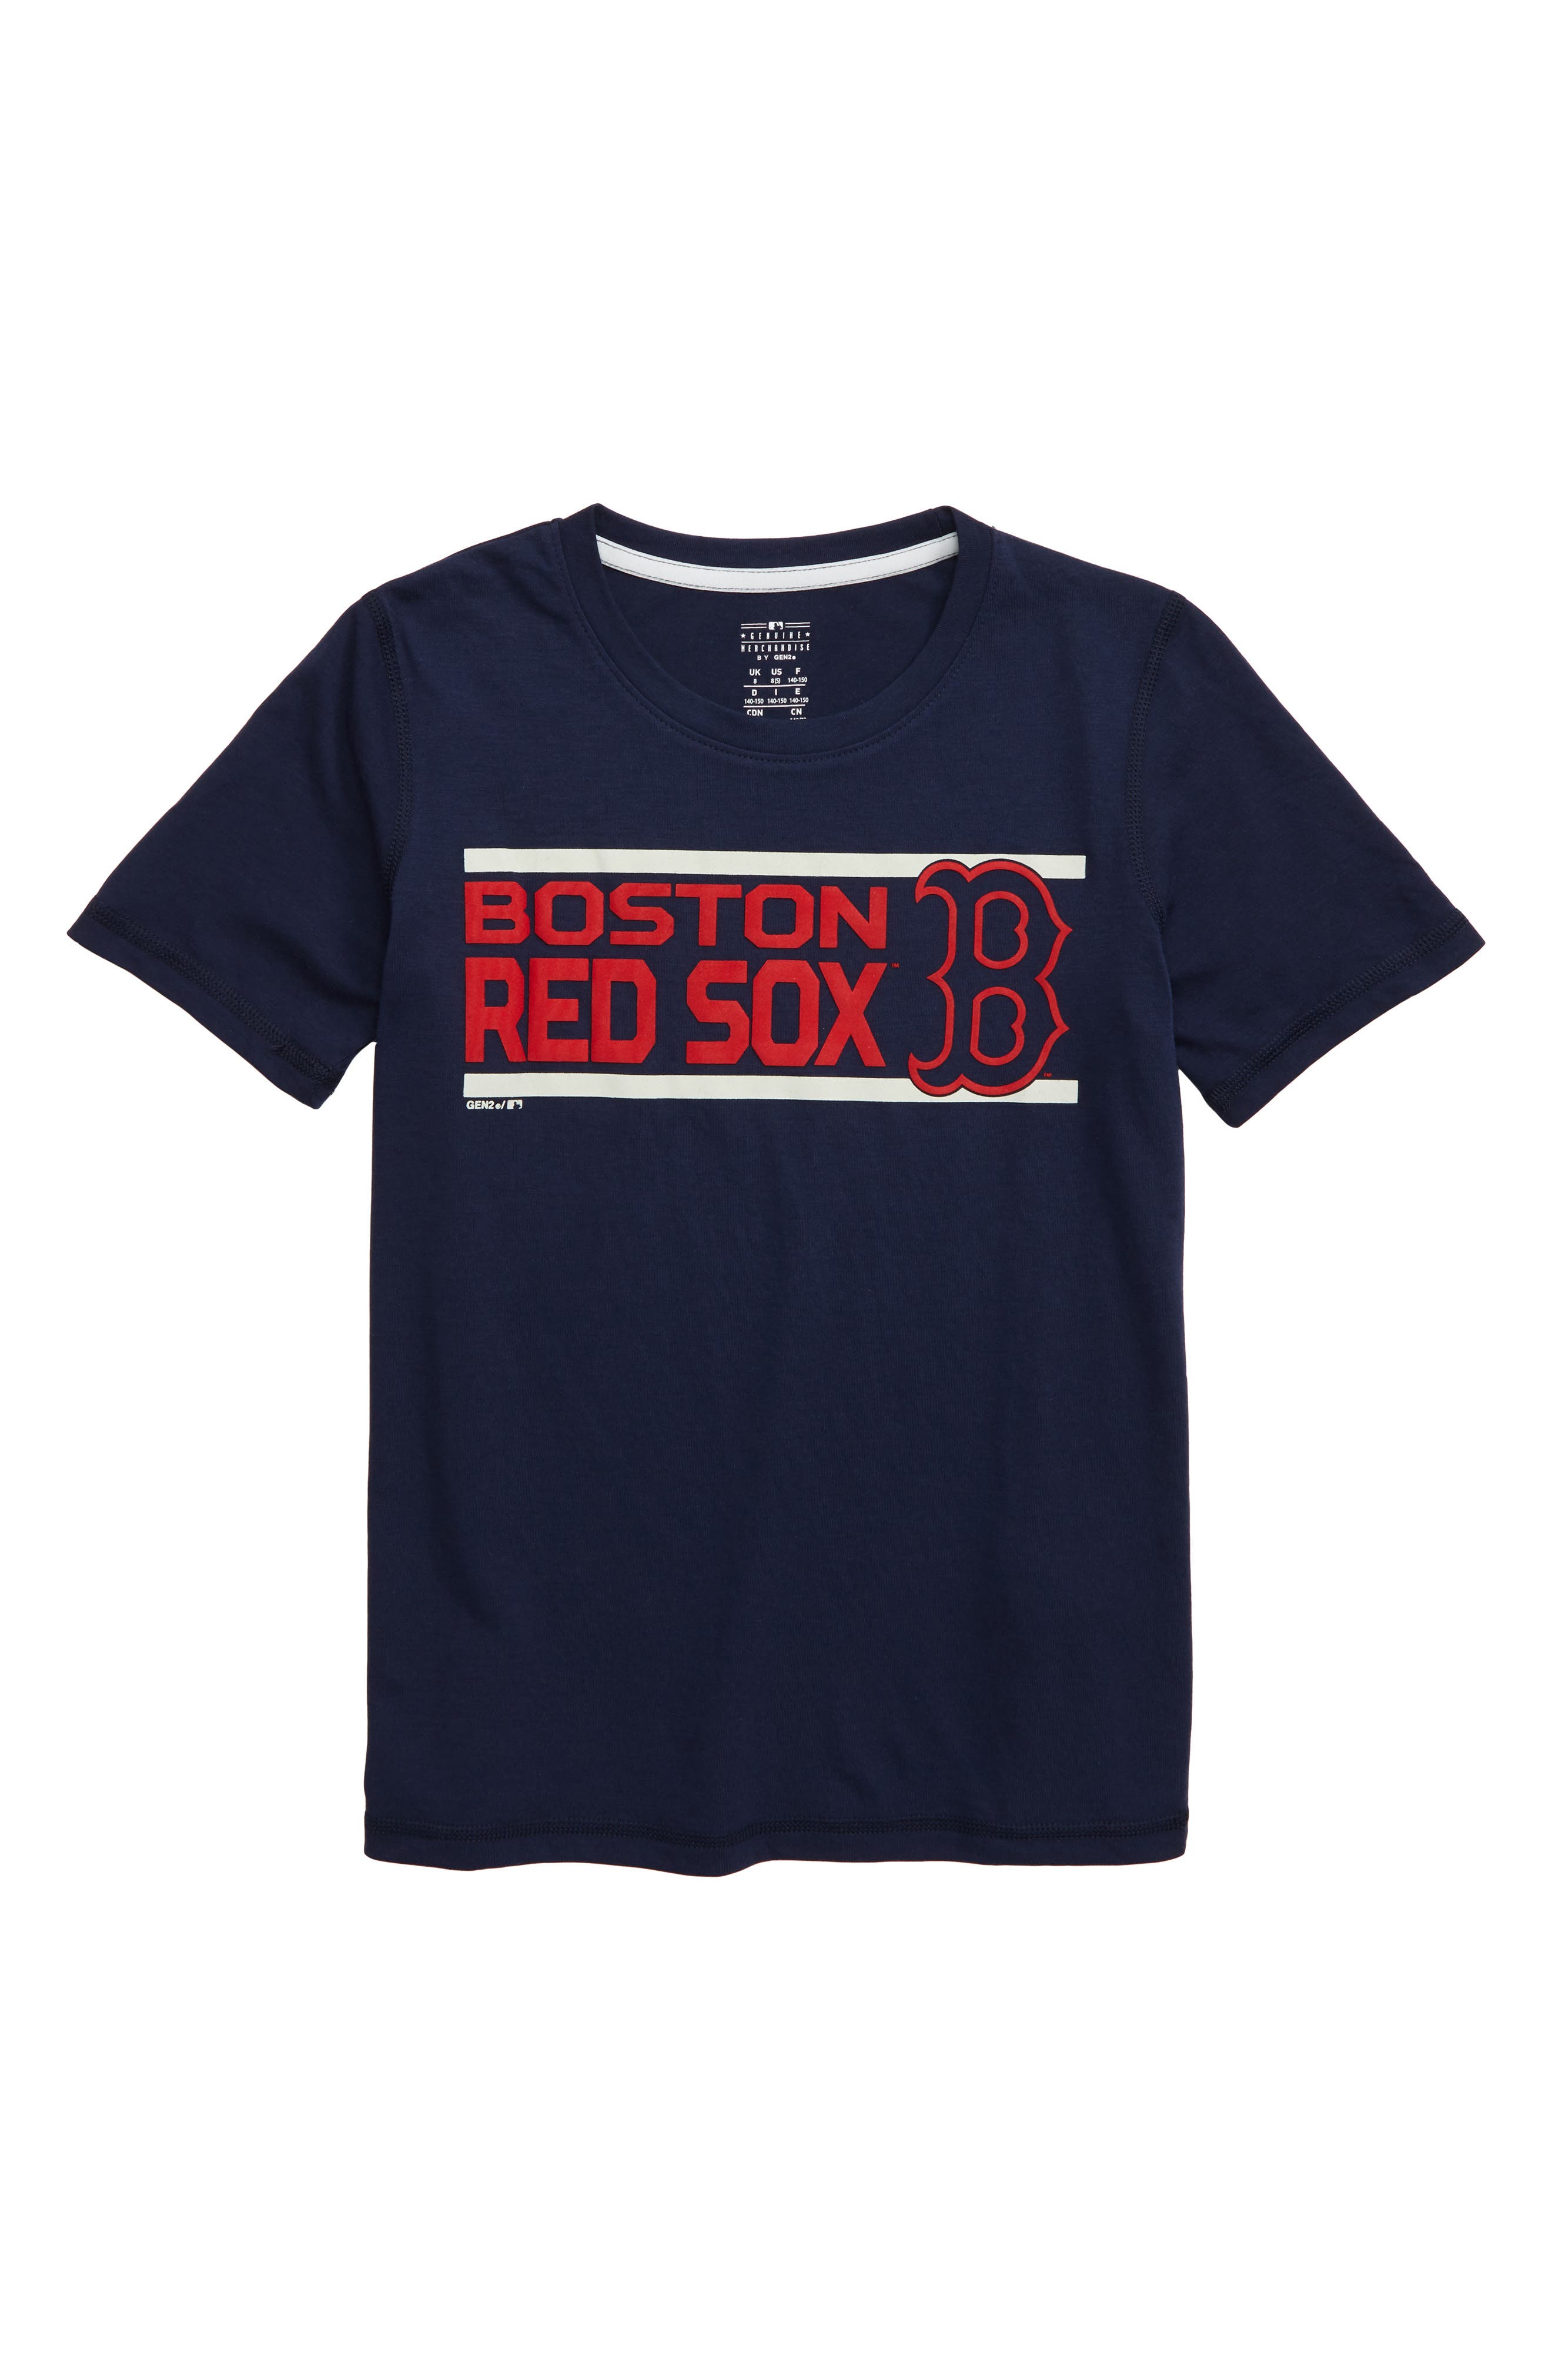 majestic red sox t shirts